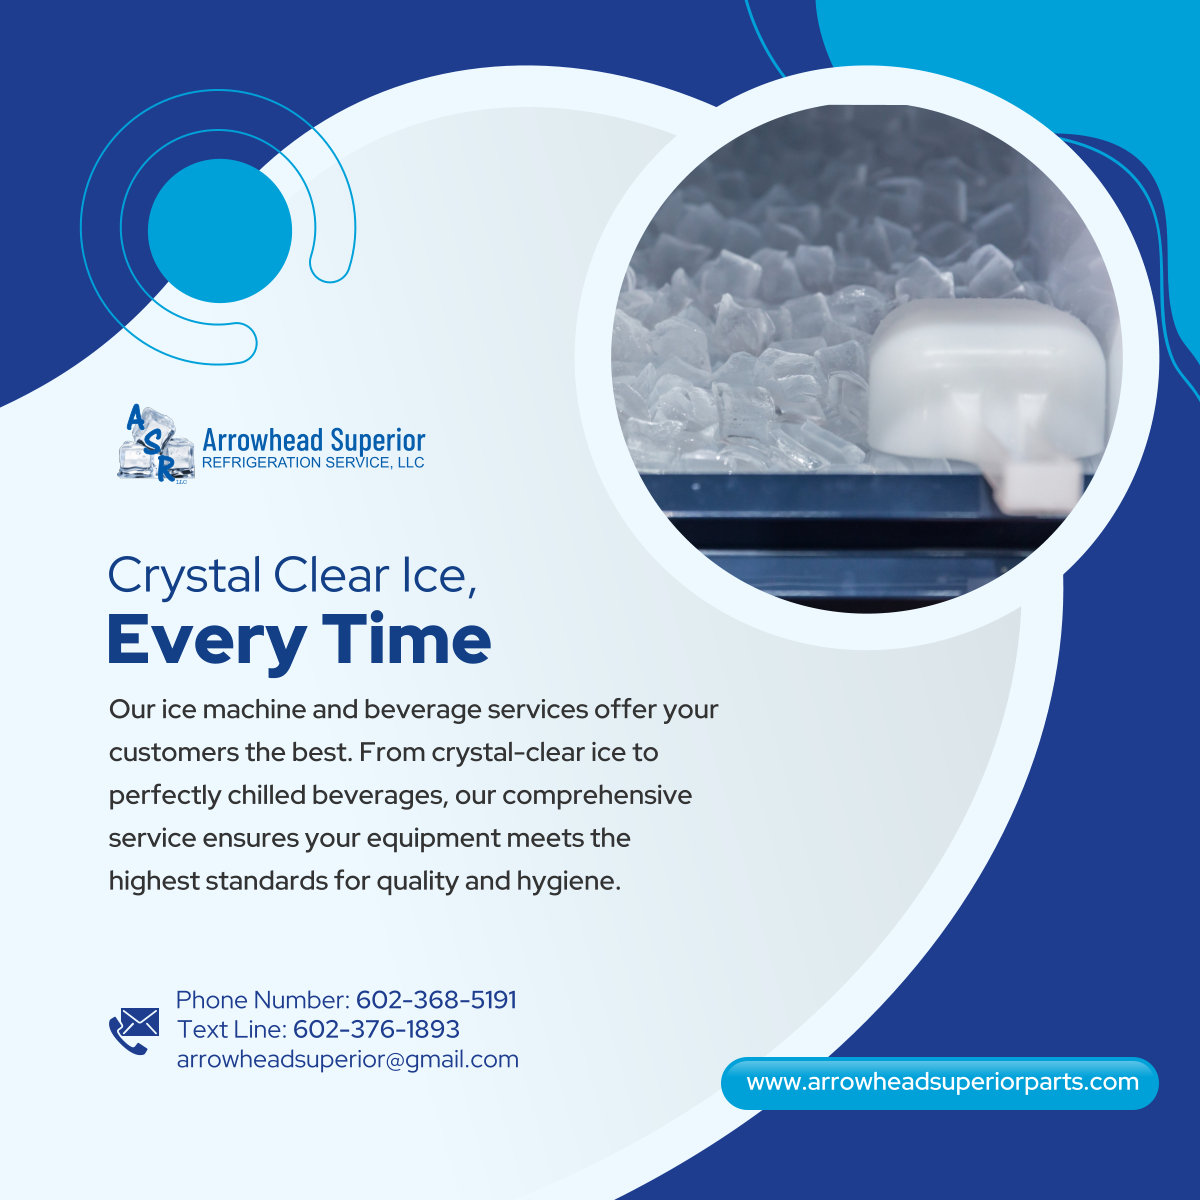 Enhance your customer's experience with the finest ice and beverages. Our services guarantee your equipment delivers the best every time. Are you looking to improve your ice machine or beverage systems? Let's make it happen.

#HygieneFirst #CommercialRefrigerationServices